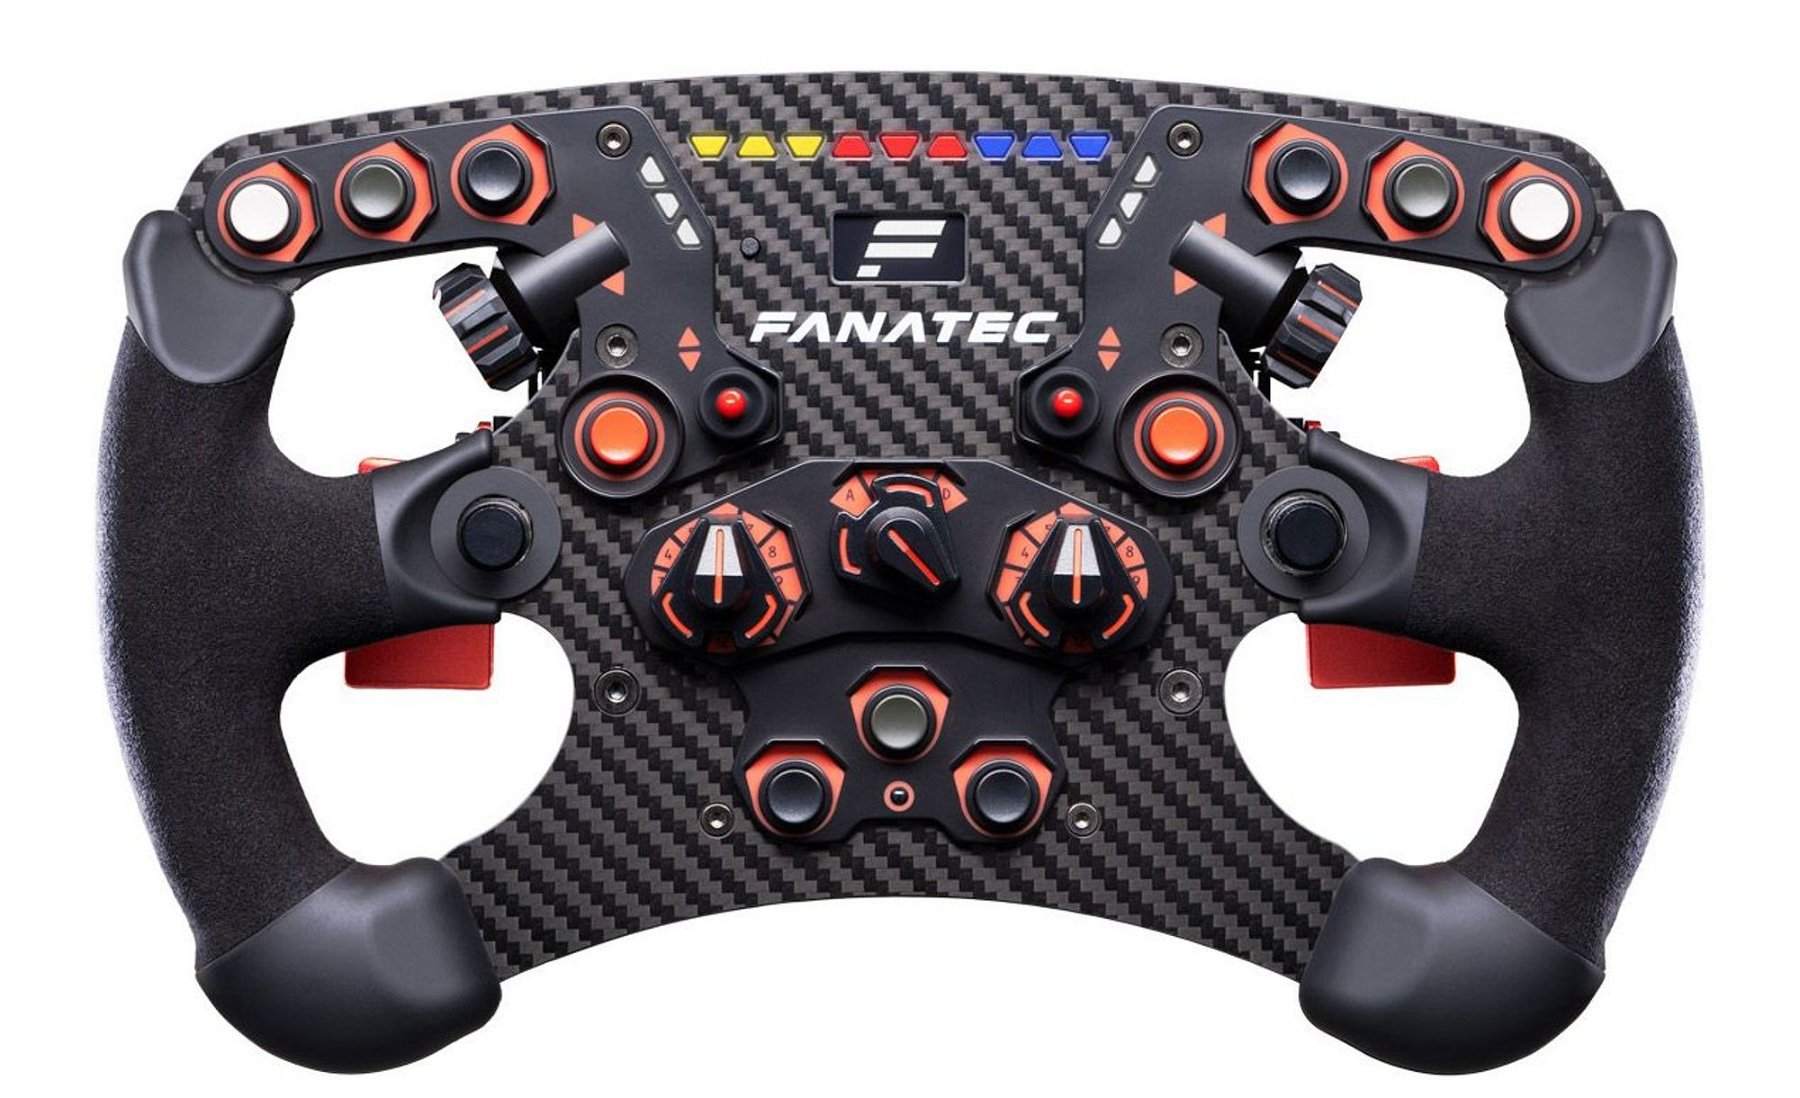 The Fanatec Wheel, Base and Pedals Ecosystem